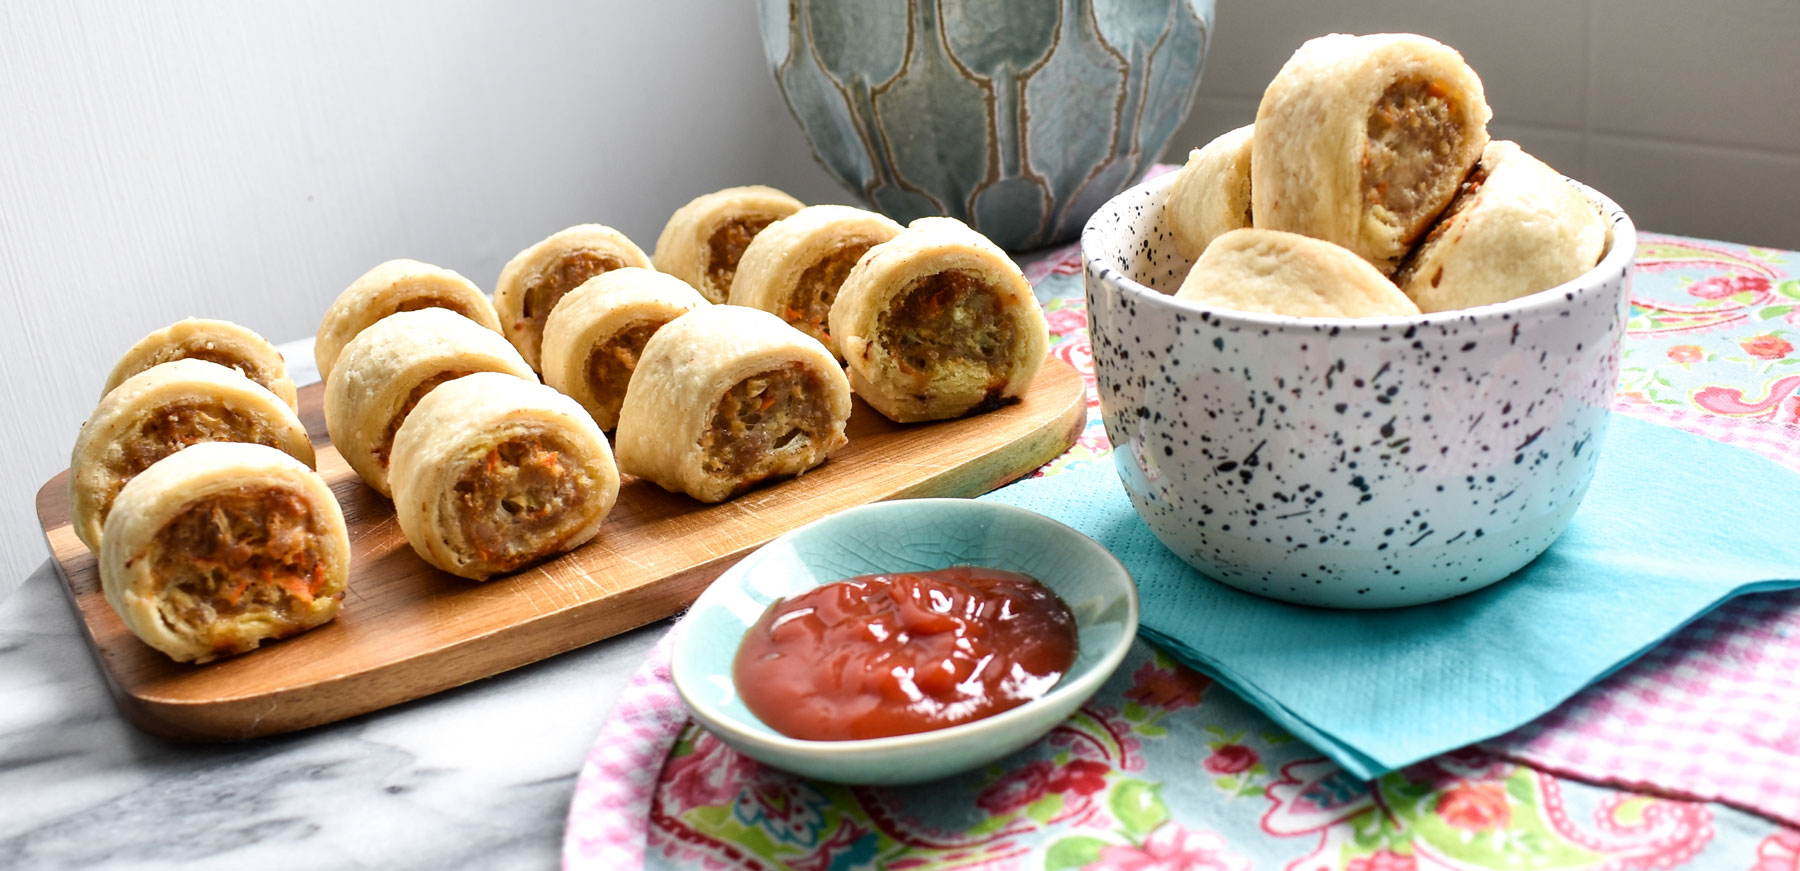 Sensational allergy friendly sausage rolls showing what the recipe produces